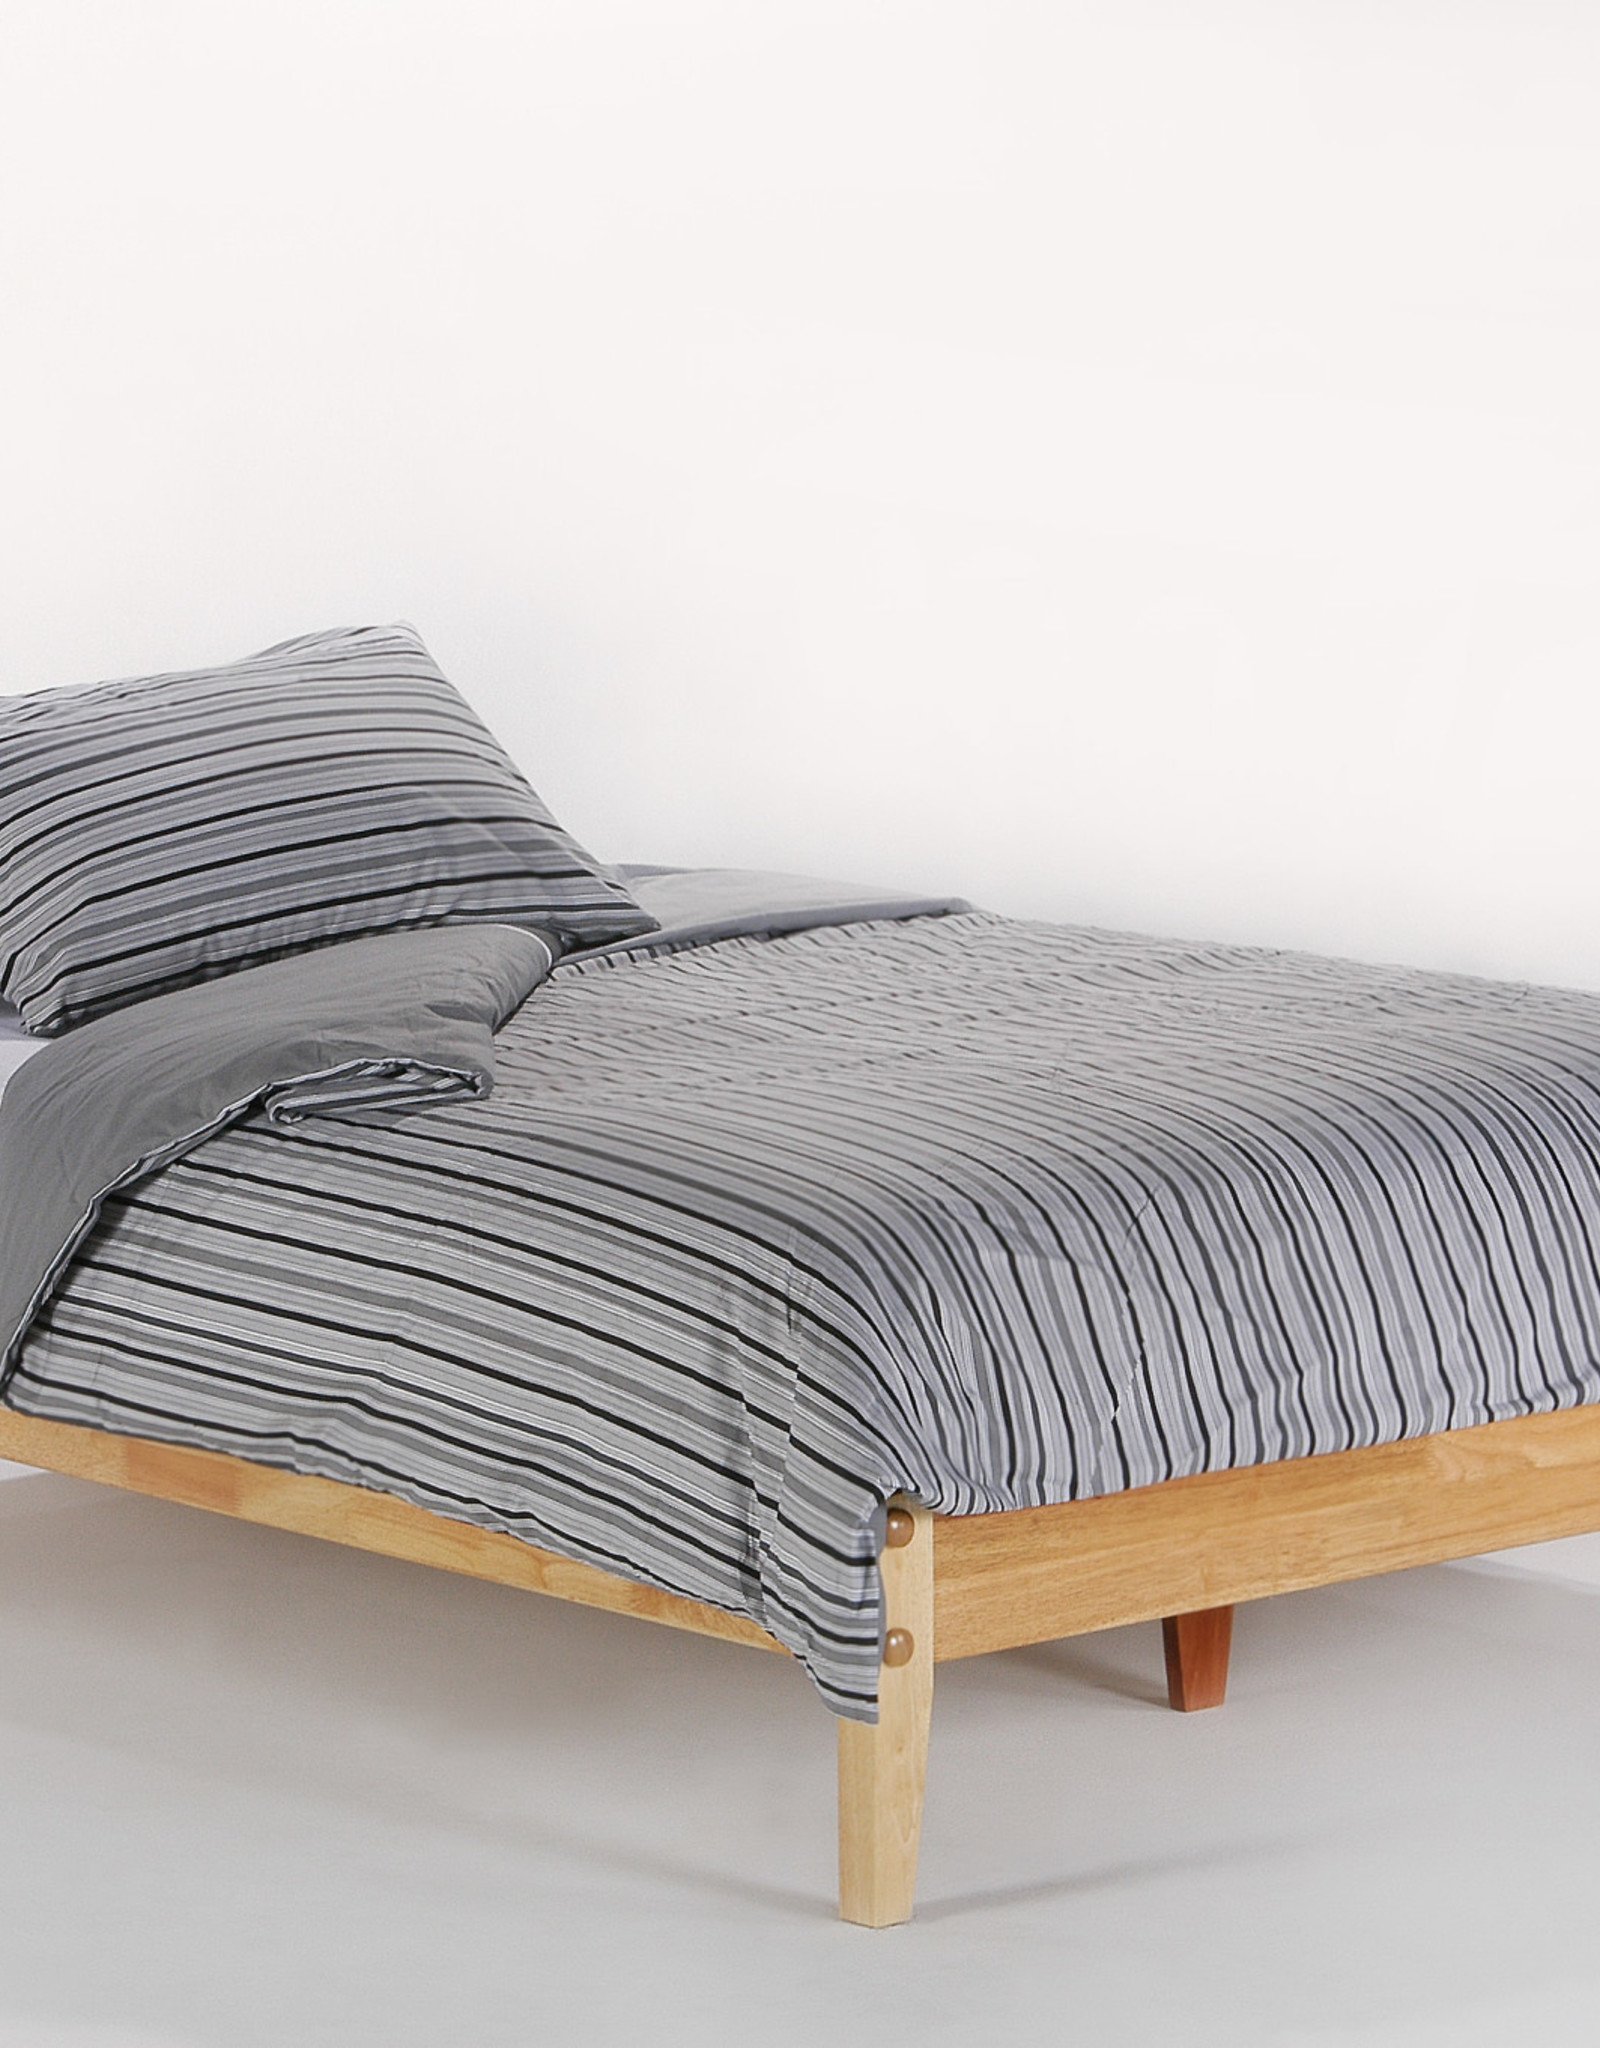 Basic Platform Bed - Comes in Four Colors